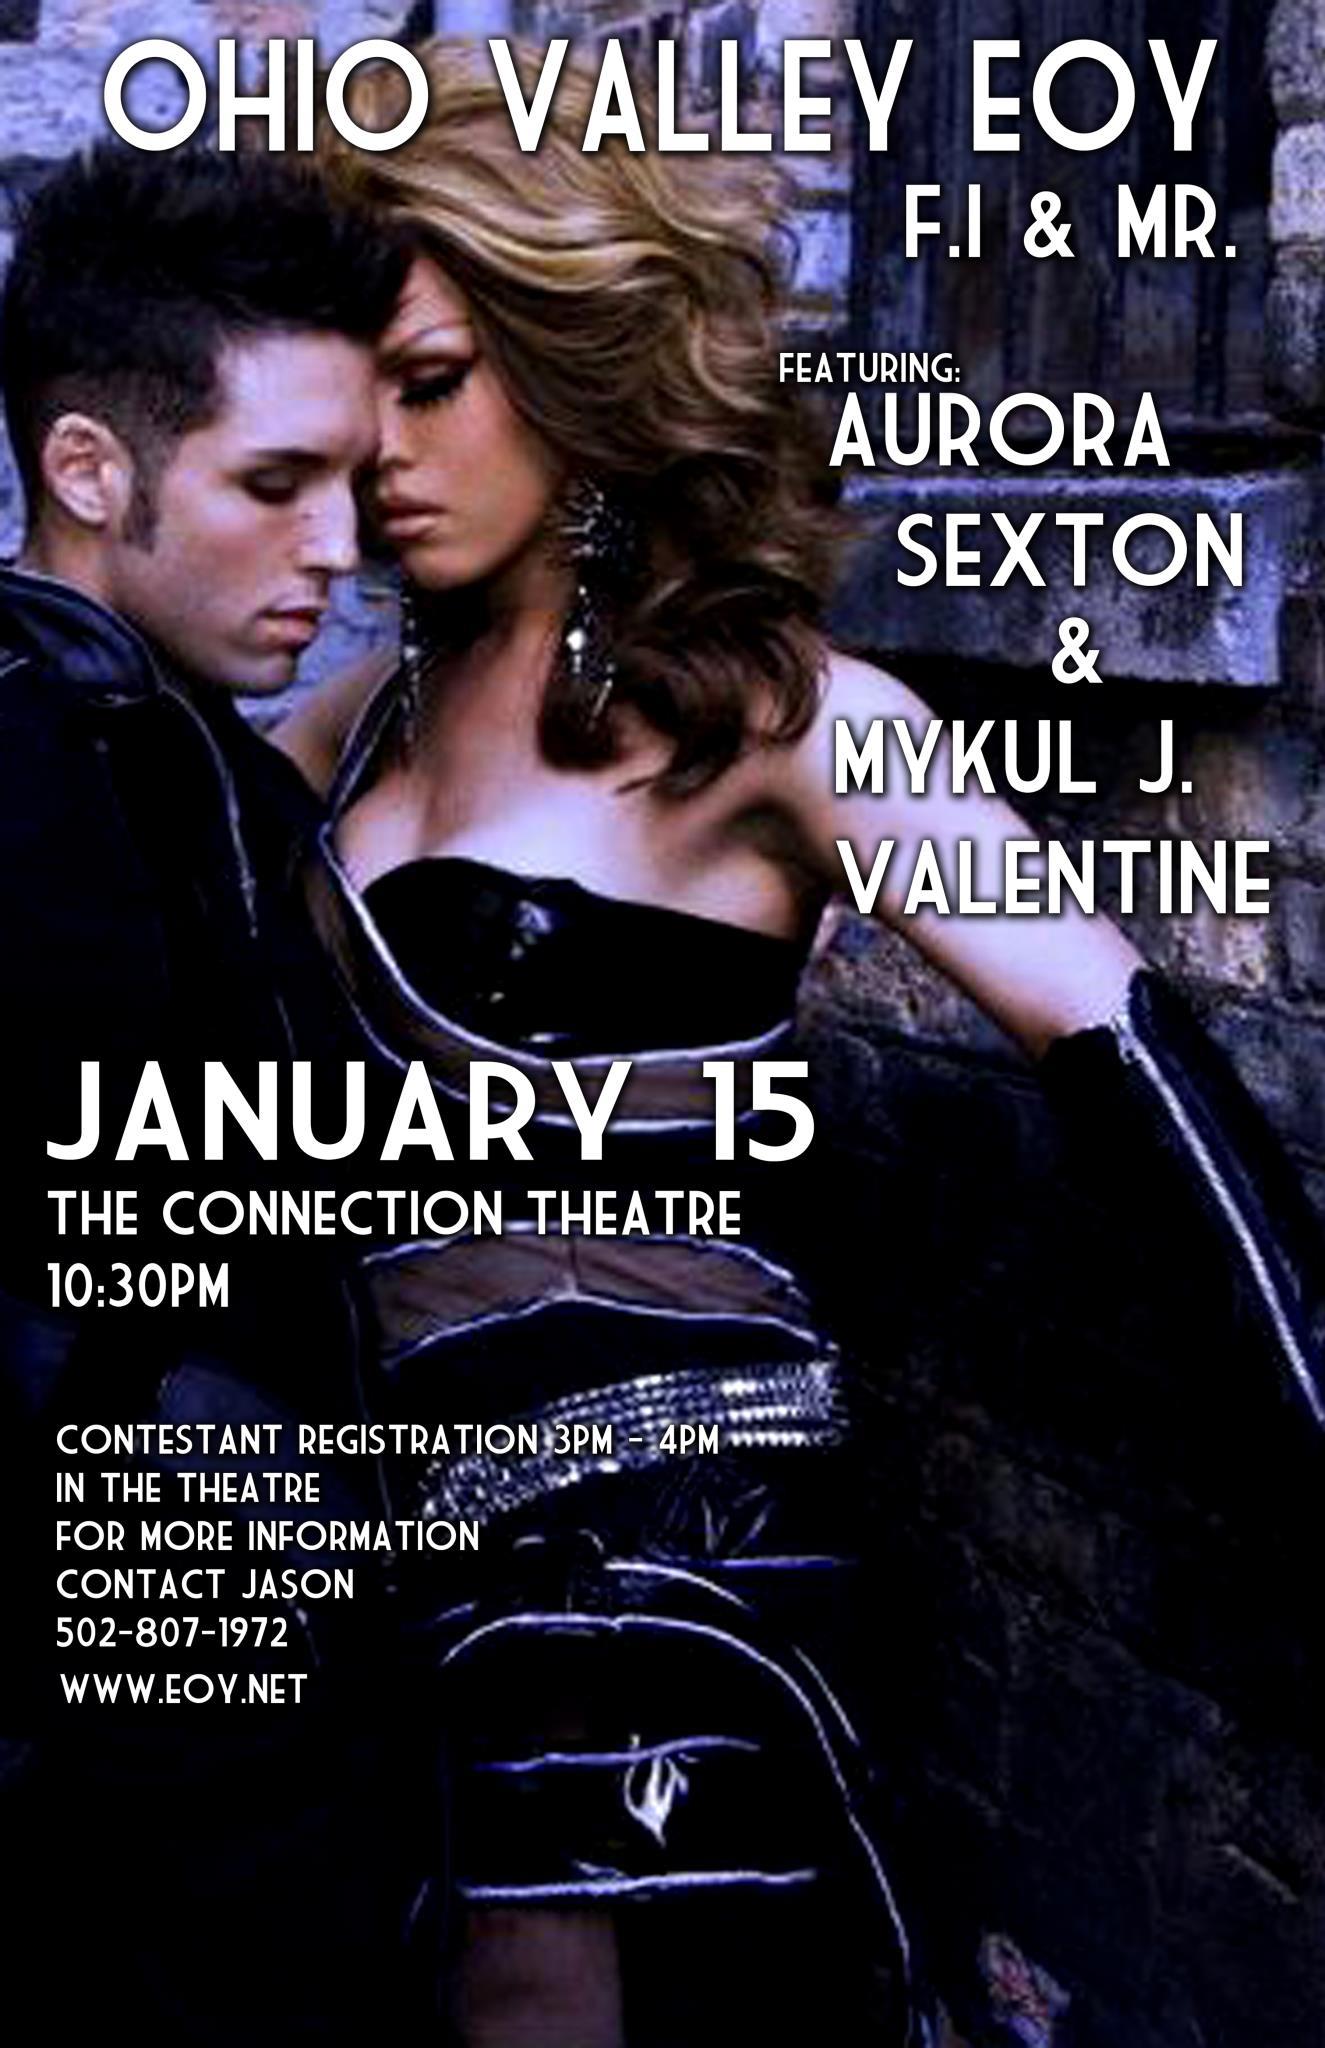 Show Ad | Ohio Valley Entertainer of the Year, F.I. and Mr. | The Connection Theatre (Louisville, Kentucky) | 1/15/2012